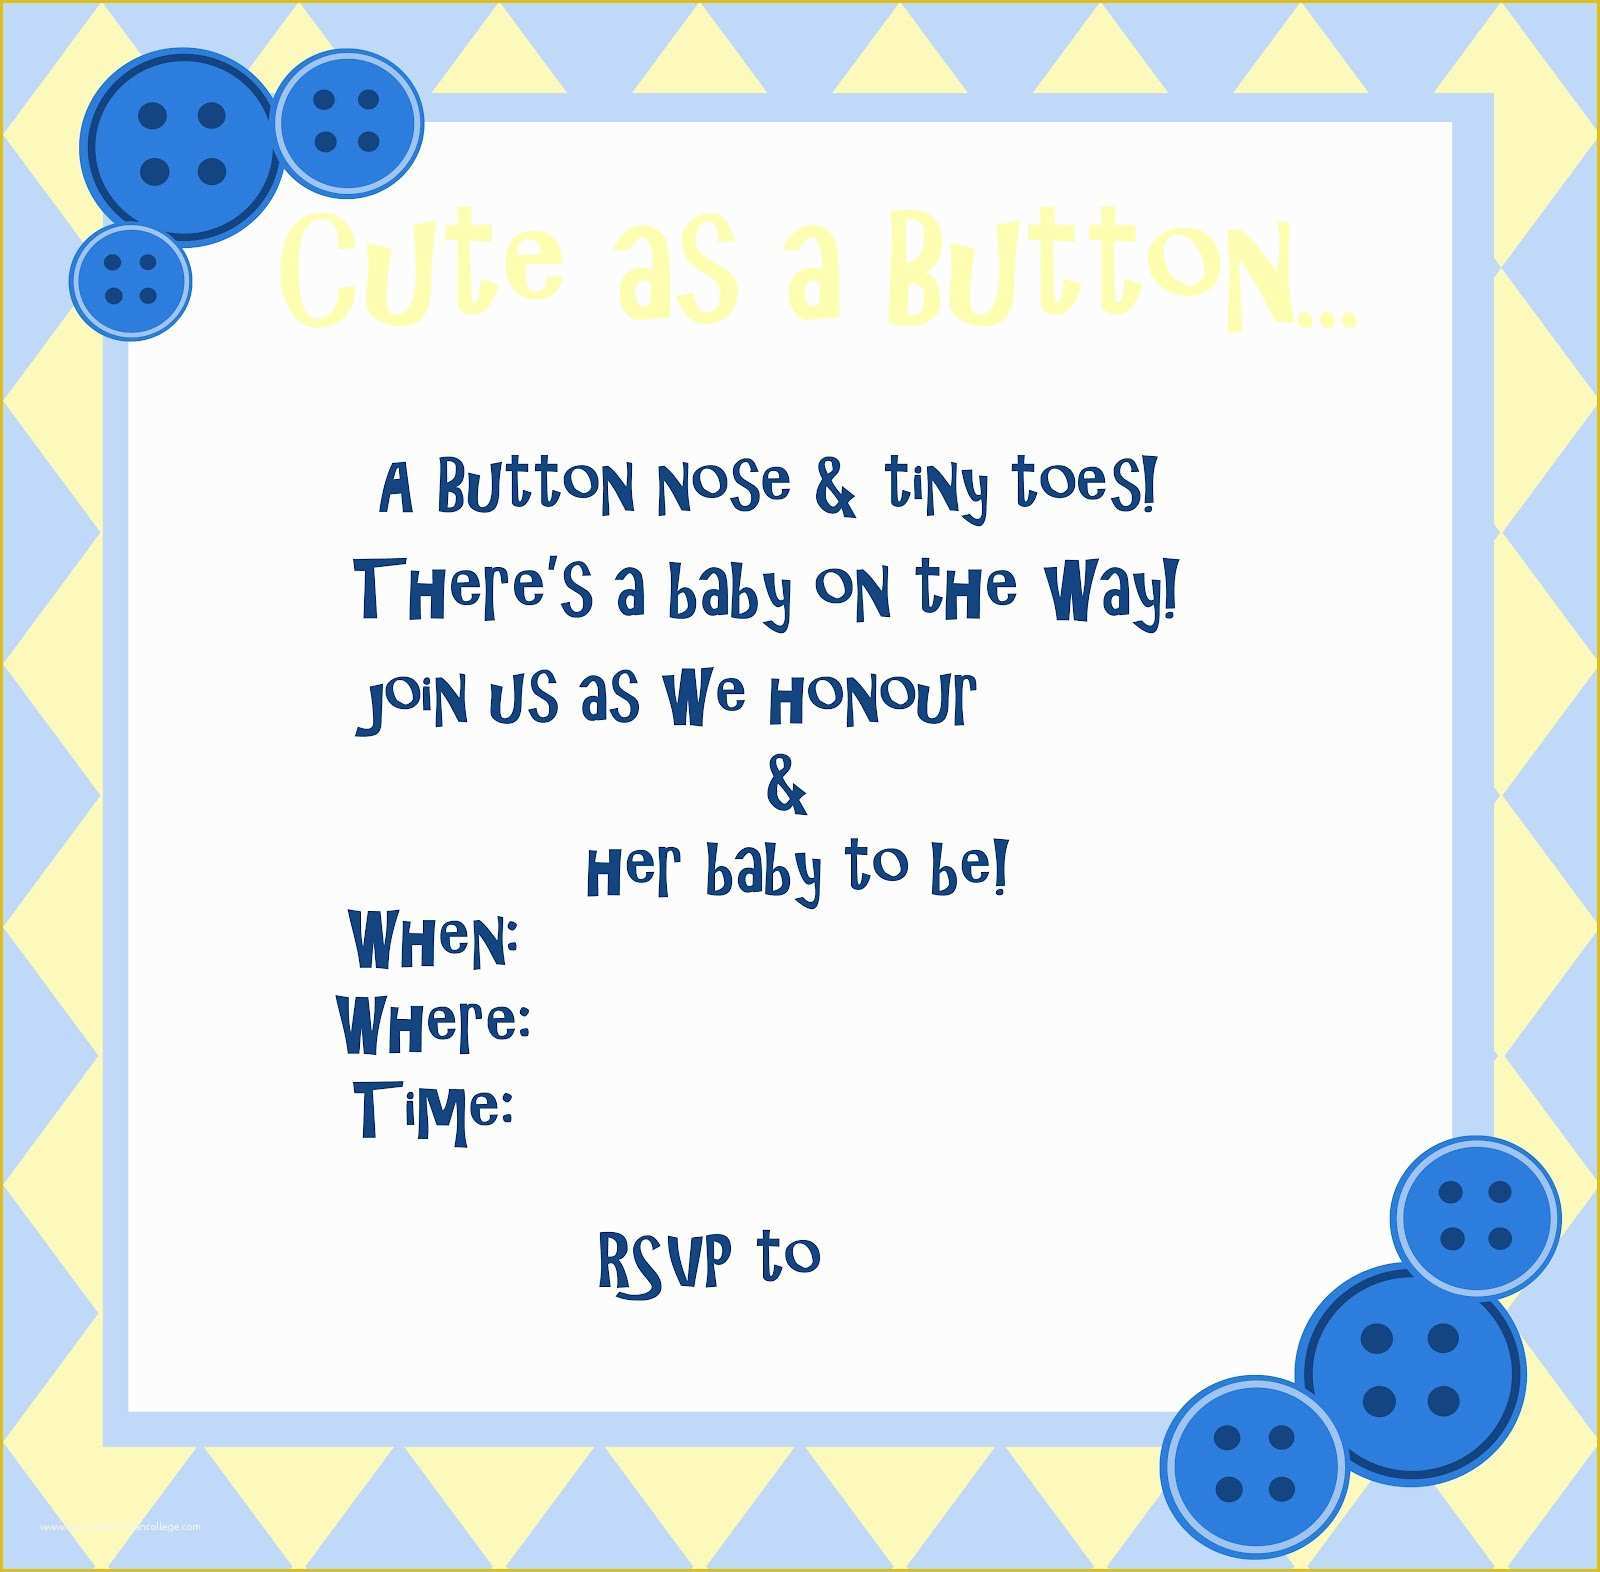 Baby Boy Baby Shower Invitations Templates Free Of the Quirky Crafting Shmoogle Bean Free Printable Cute